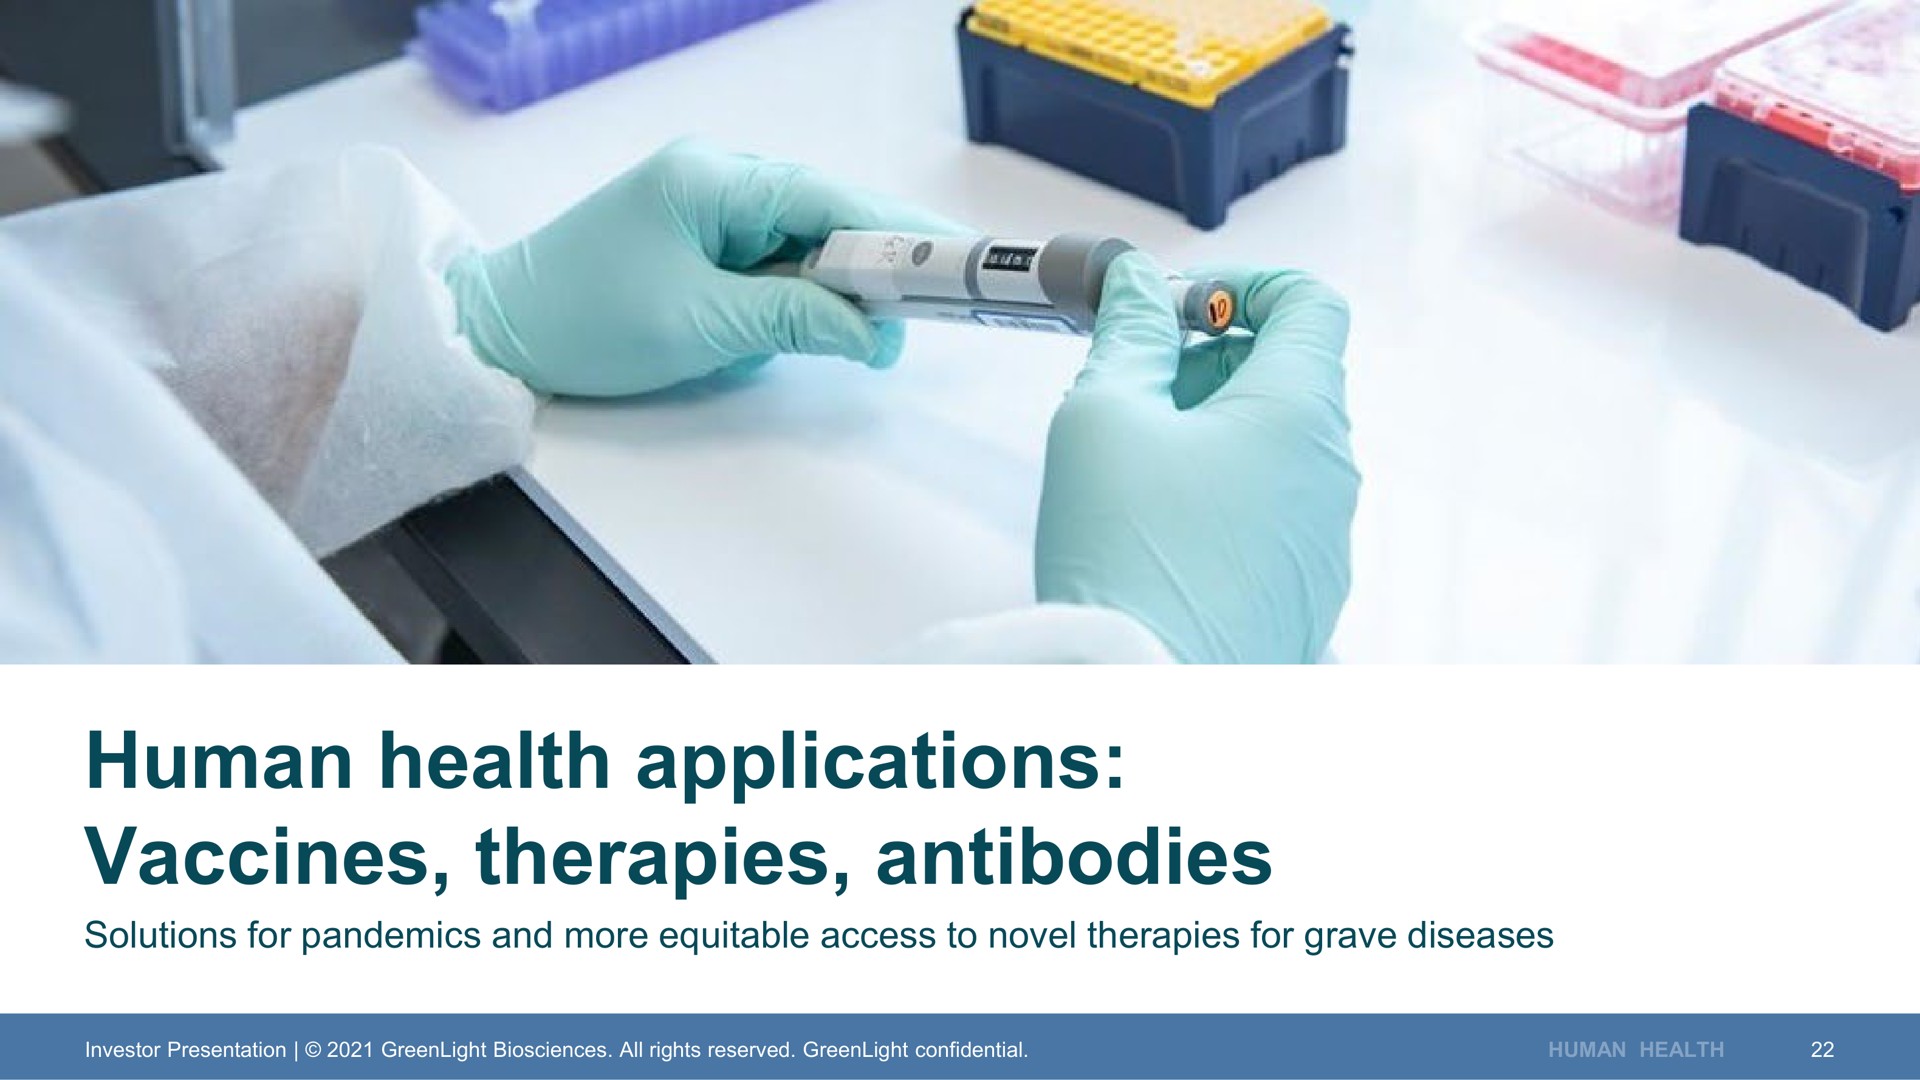 human health applications vaccines therapies antibodies solutions for pandemics and more equitable access to novel therapies for grave diseases | GreenLight